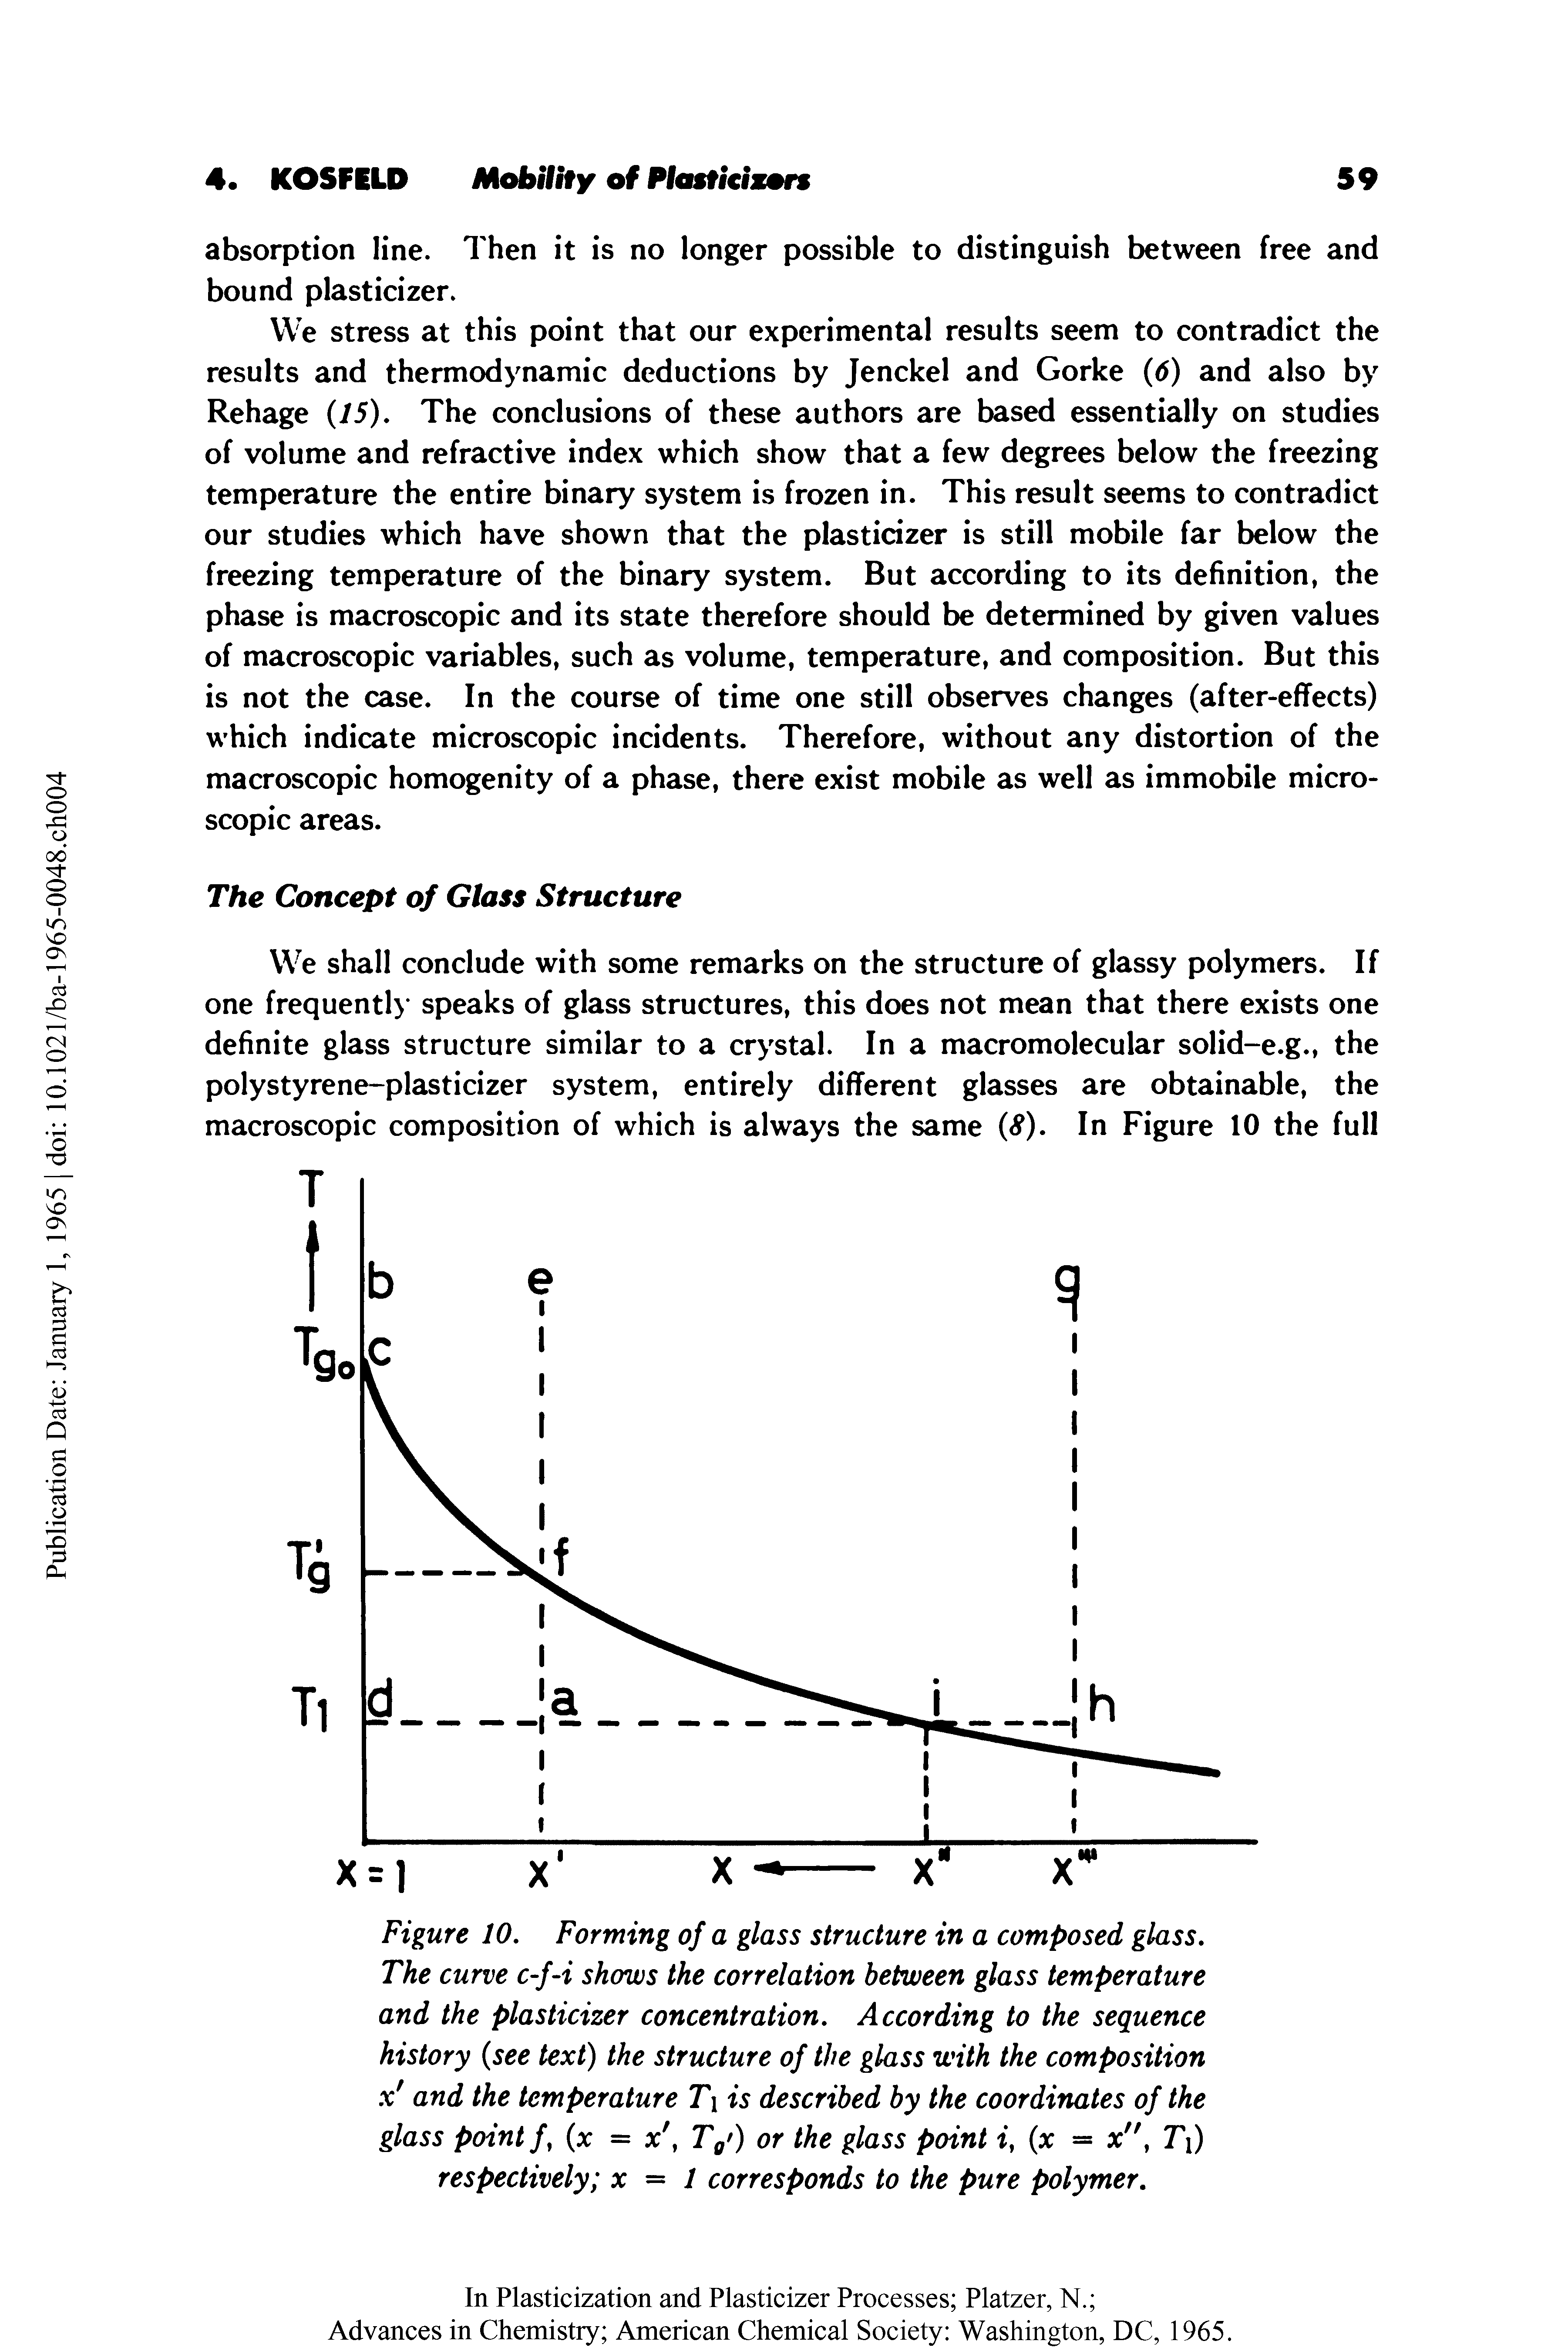 Figure 10. Forming of a glass structure in a composed glass. The curve c-f-i shows the correlation between glass temperature and the plasticizer concentration. According to the sequence history (see text) the structure of the glass with the composition x and the temperature T is described by the coordinates of the glass point /, (x = x T0>) or the glass point f, (x = x", T ) respectively x = 1 corresponds to the pure polymer.